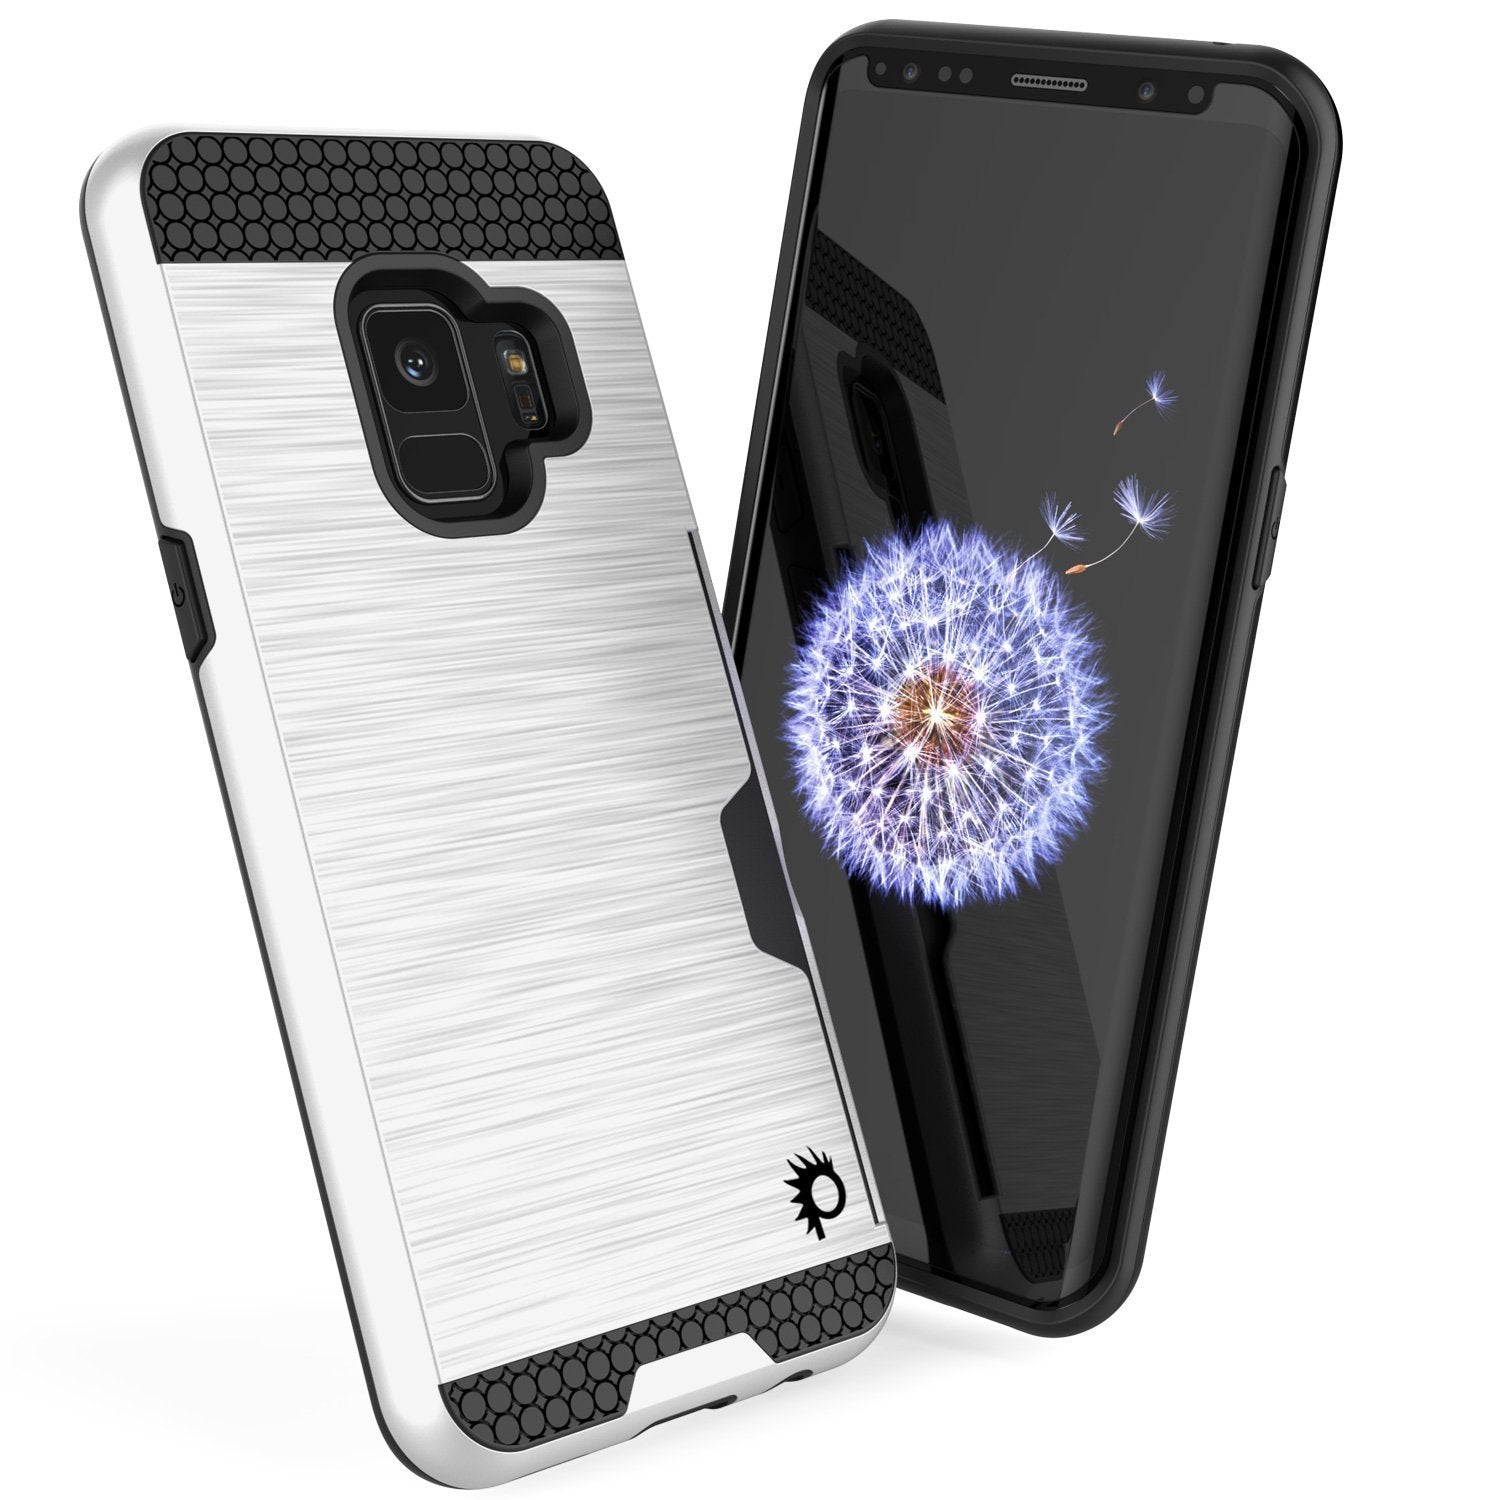 Galaxy S9 case, Punkcase SLOT Series Dual-Layer Cover [White]